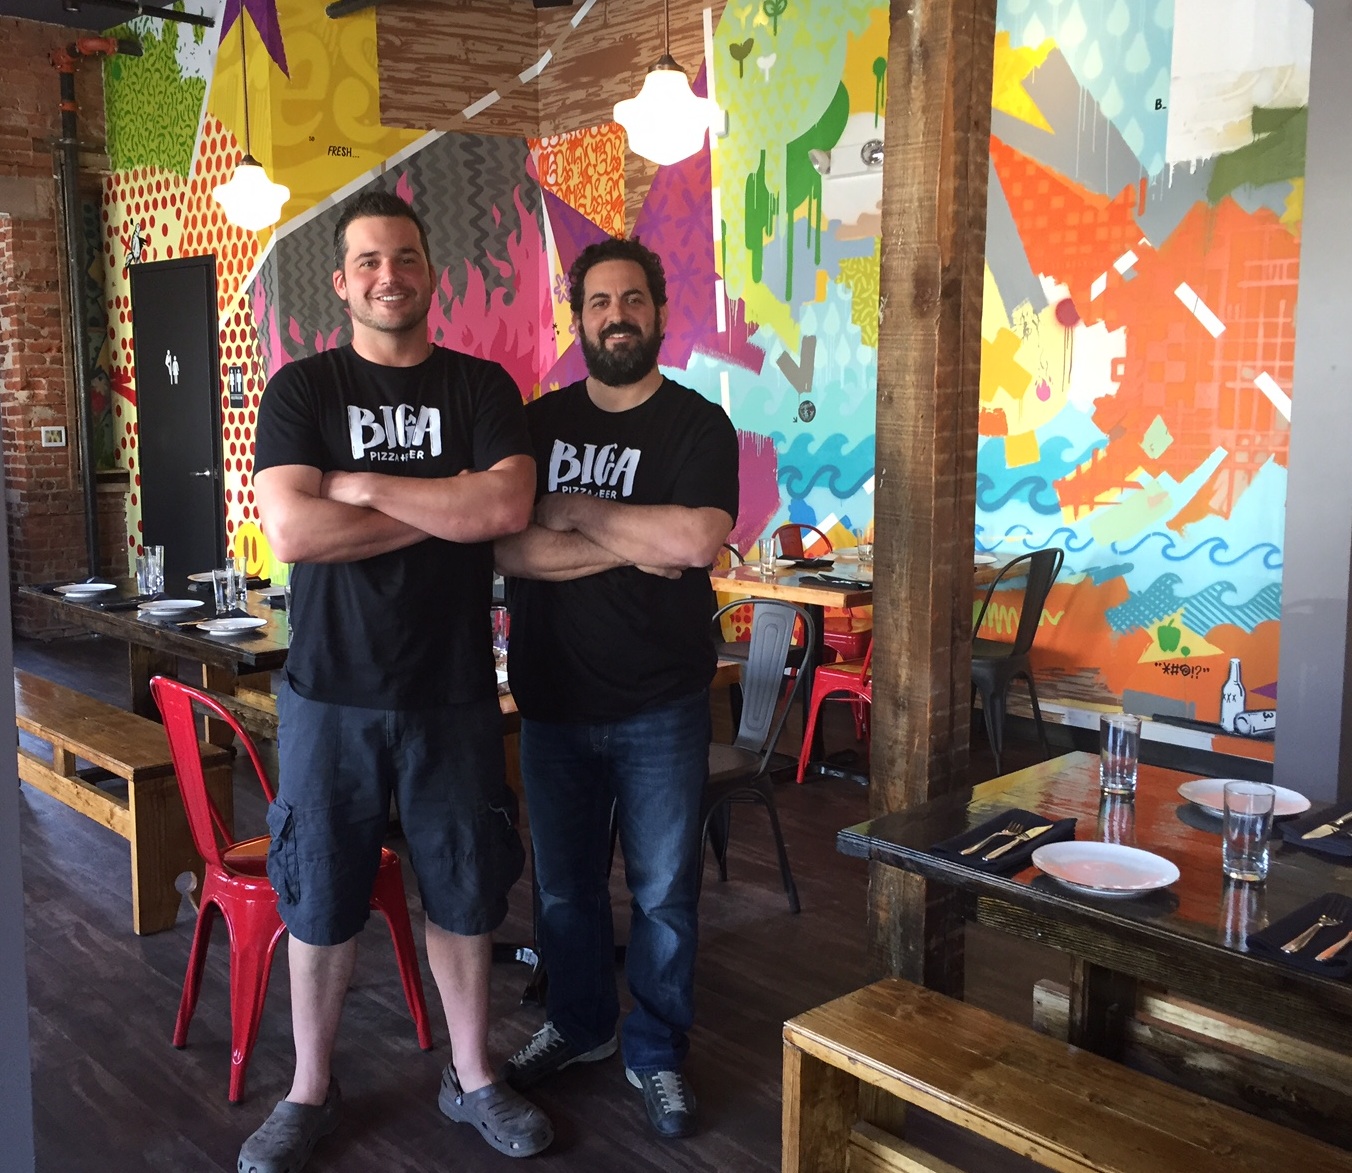 Top chefs at the new Biga: former Alba sous chef Steve Fulmer and Alba chef-owner Sean Weinberg. The space is industrial/grunge cool: exposed brick walls, hand-made trestle tables and a killer mural by Philly artist Ntel. 